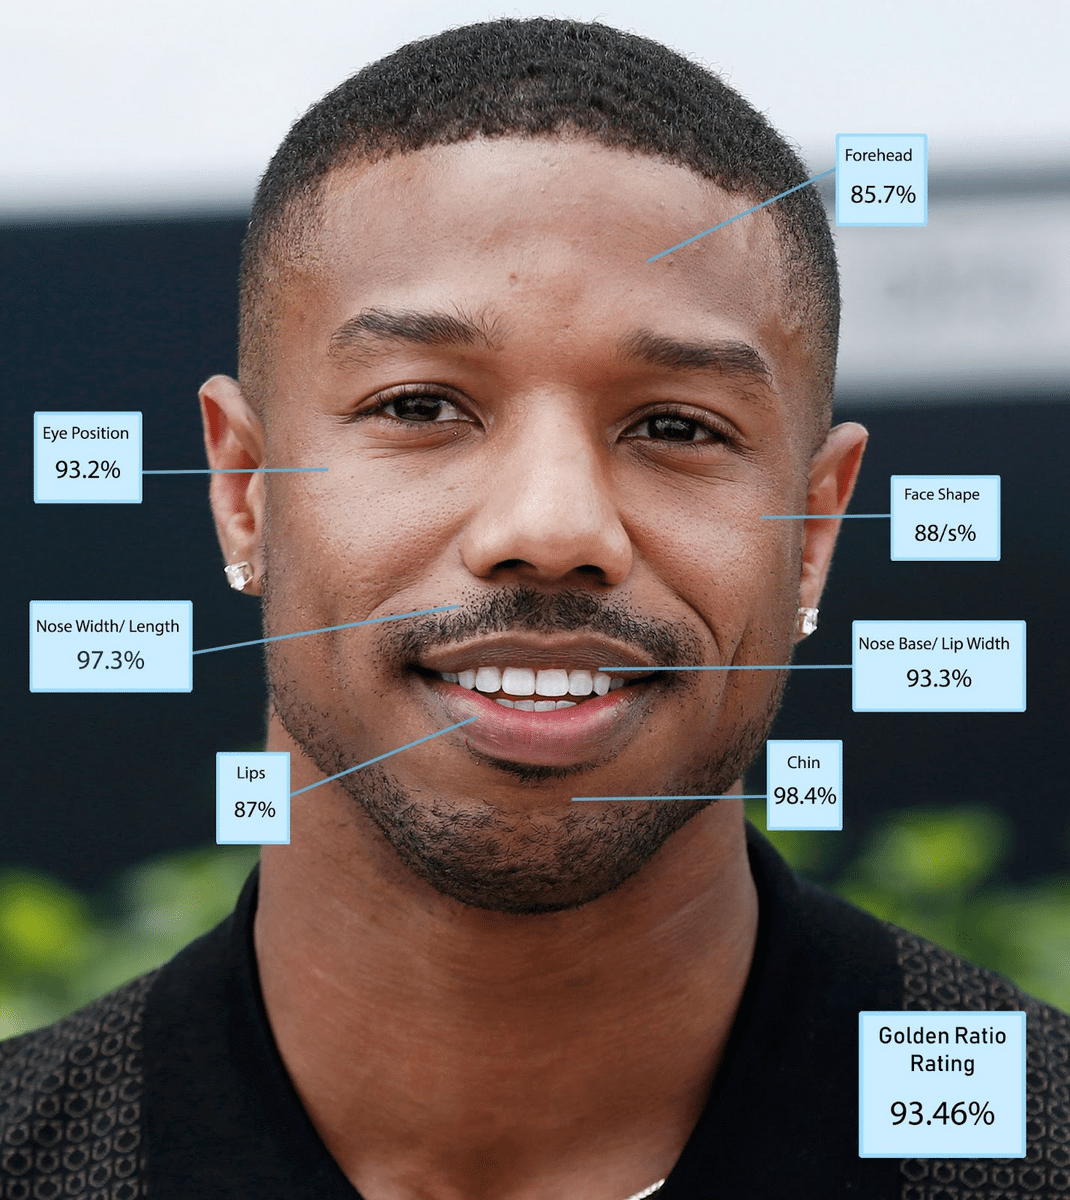 Michael B. Jordan is an American actor best known for his roles in the Creed and Black Panther movies.